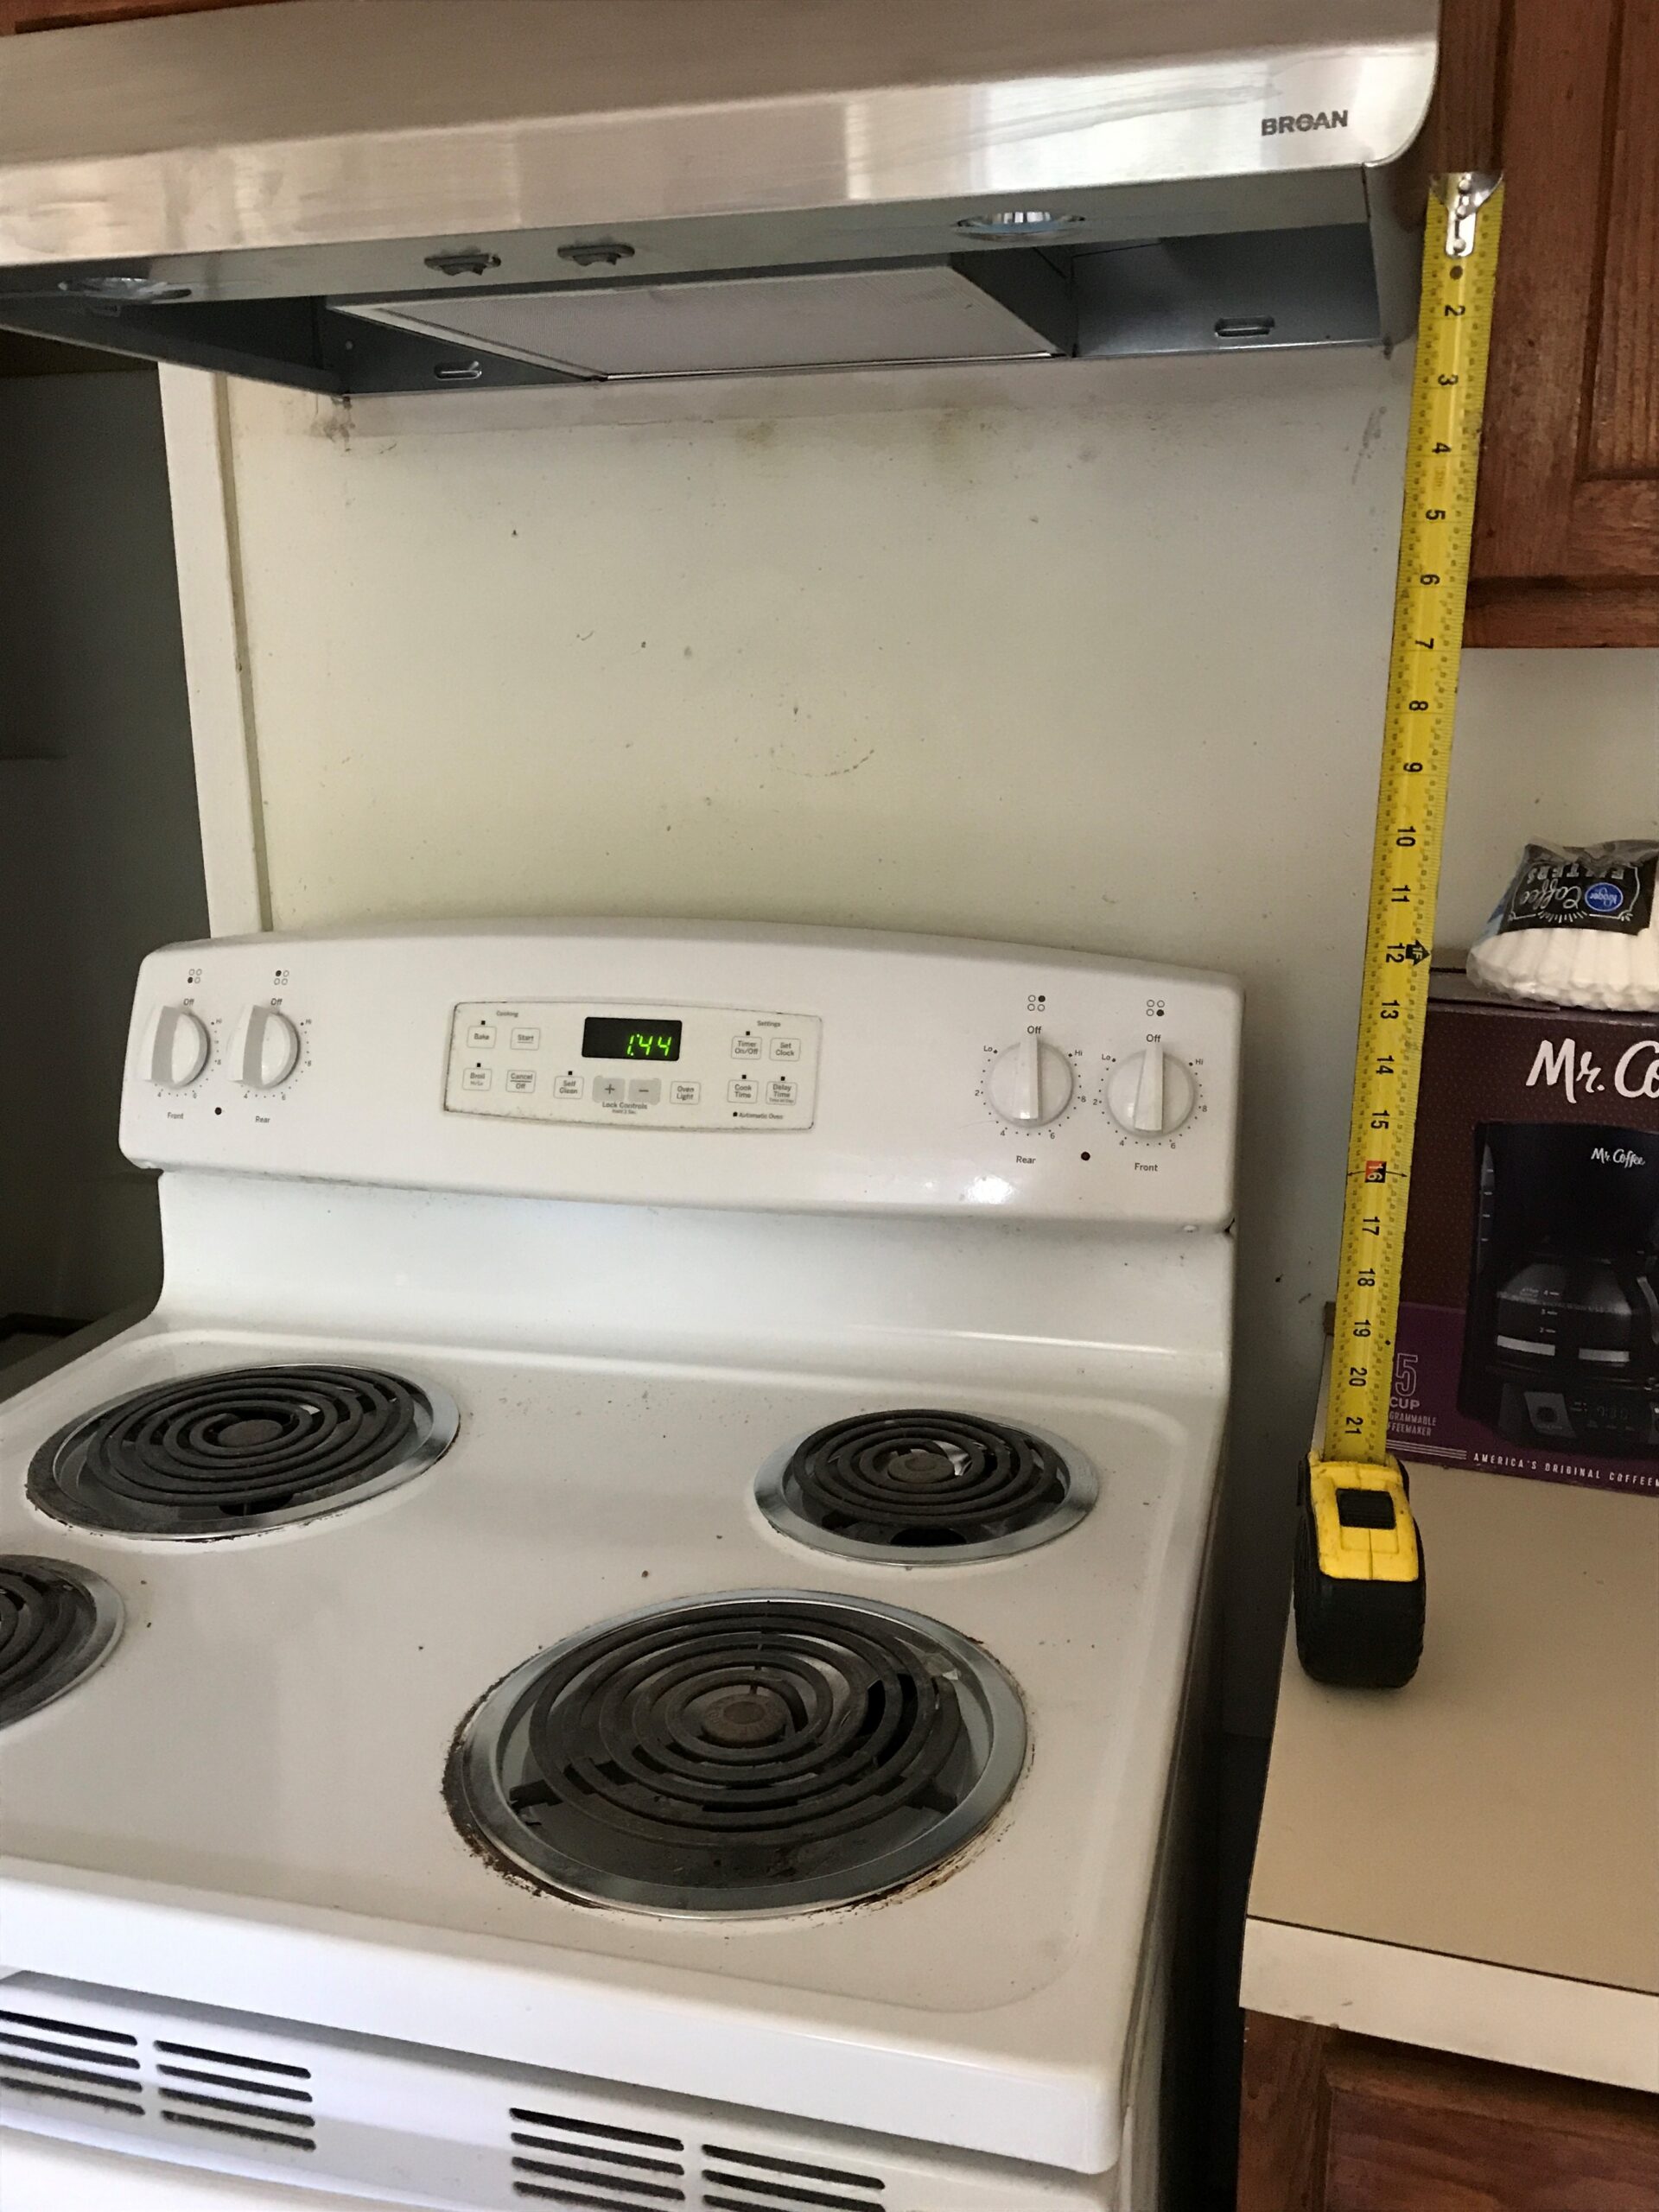 A measuring tape next to an electric stove